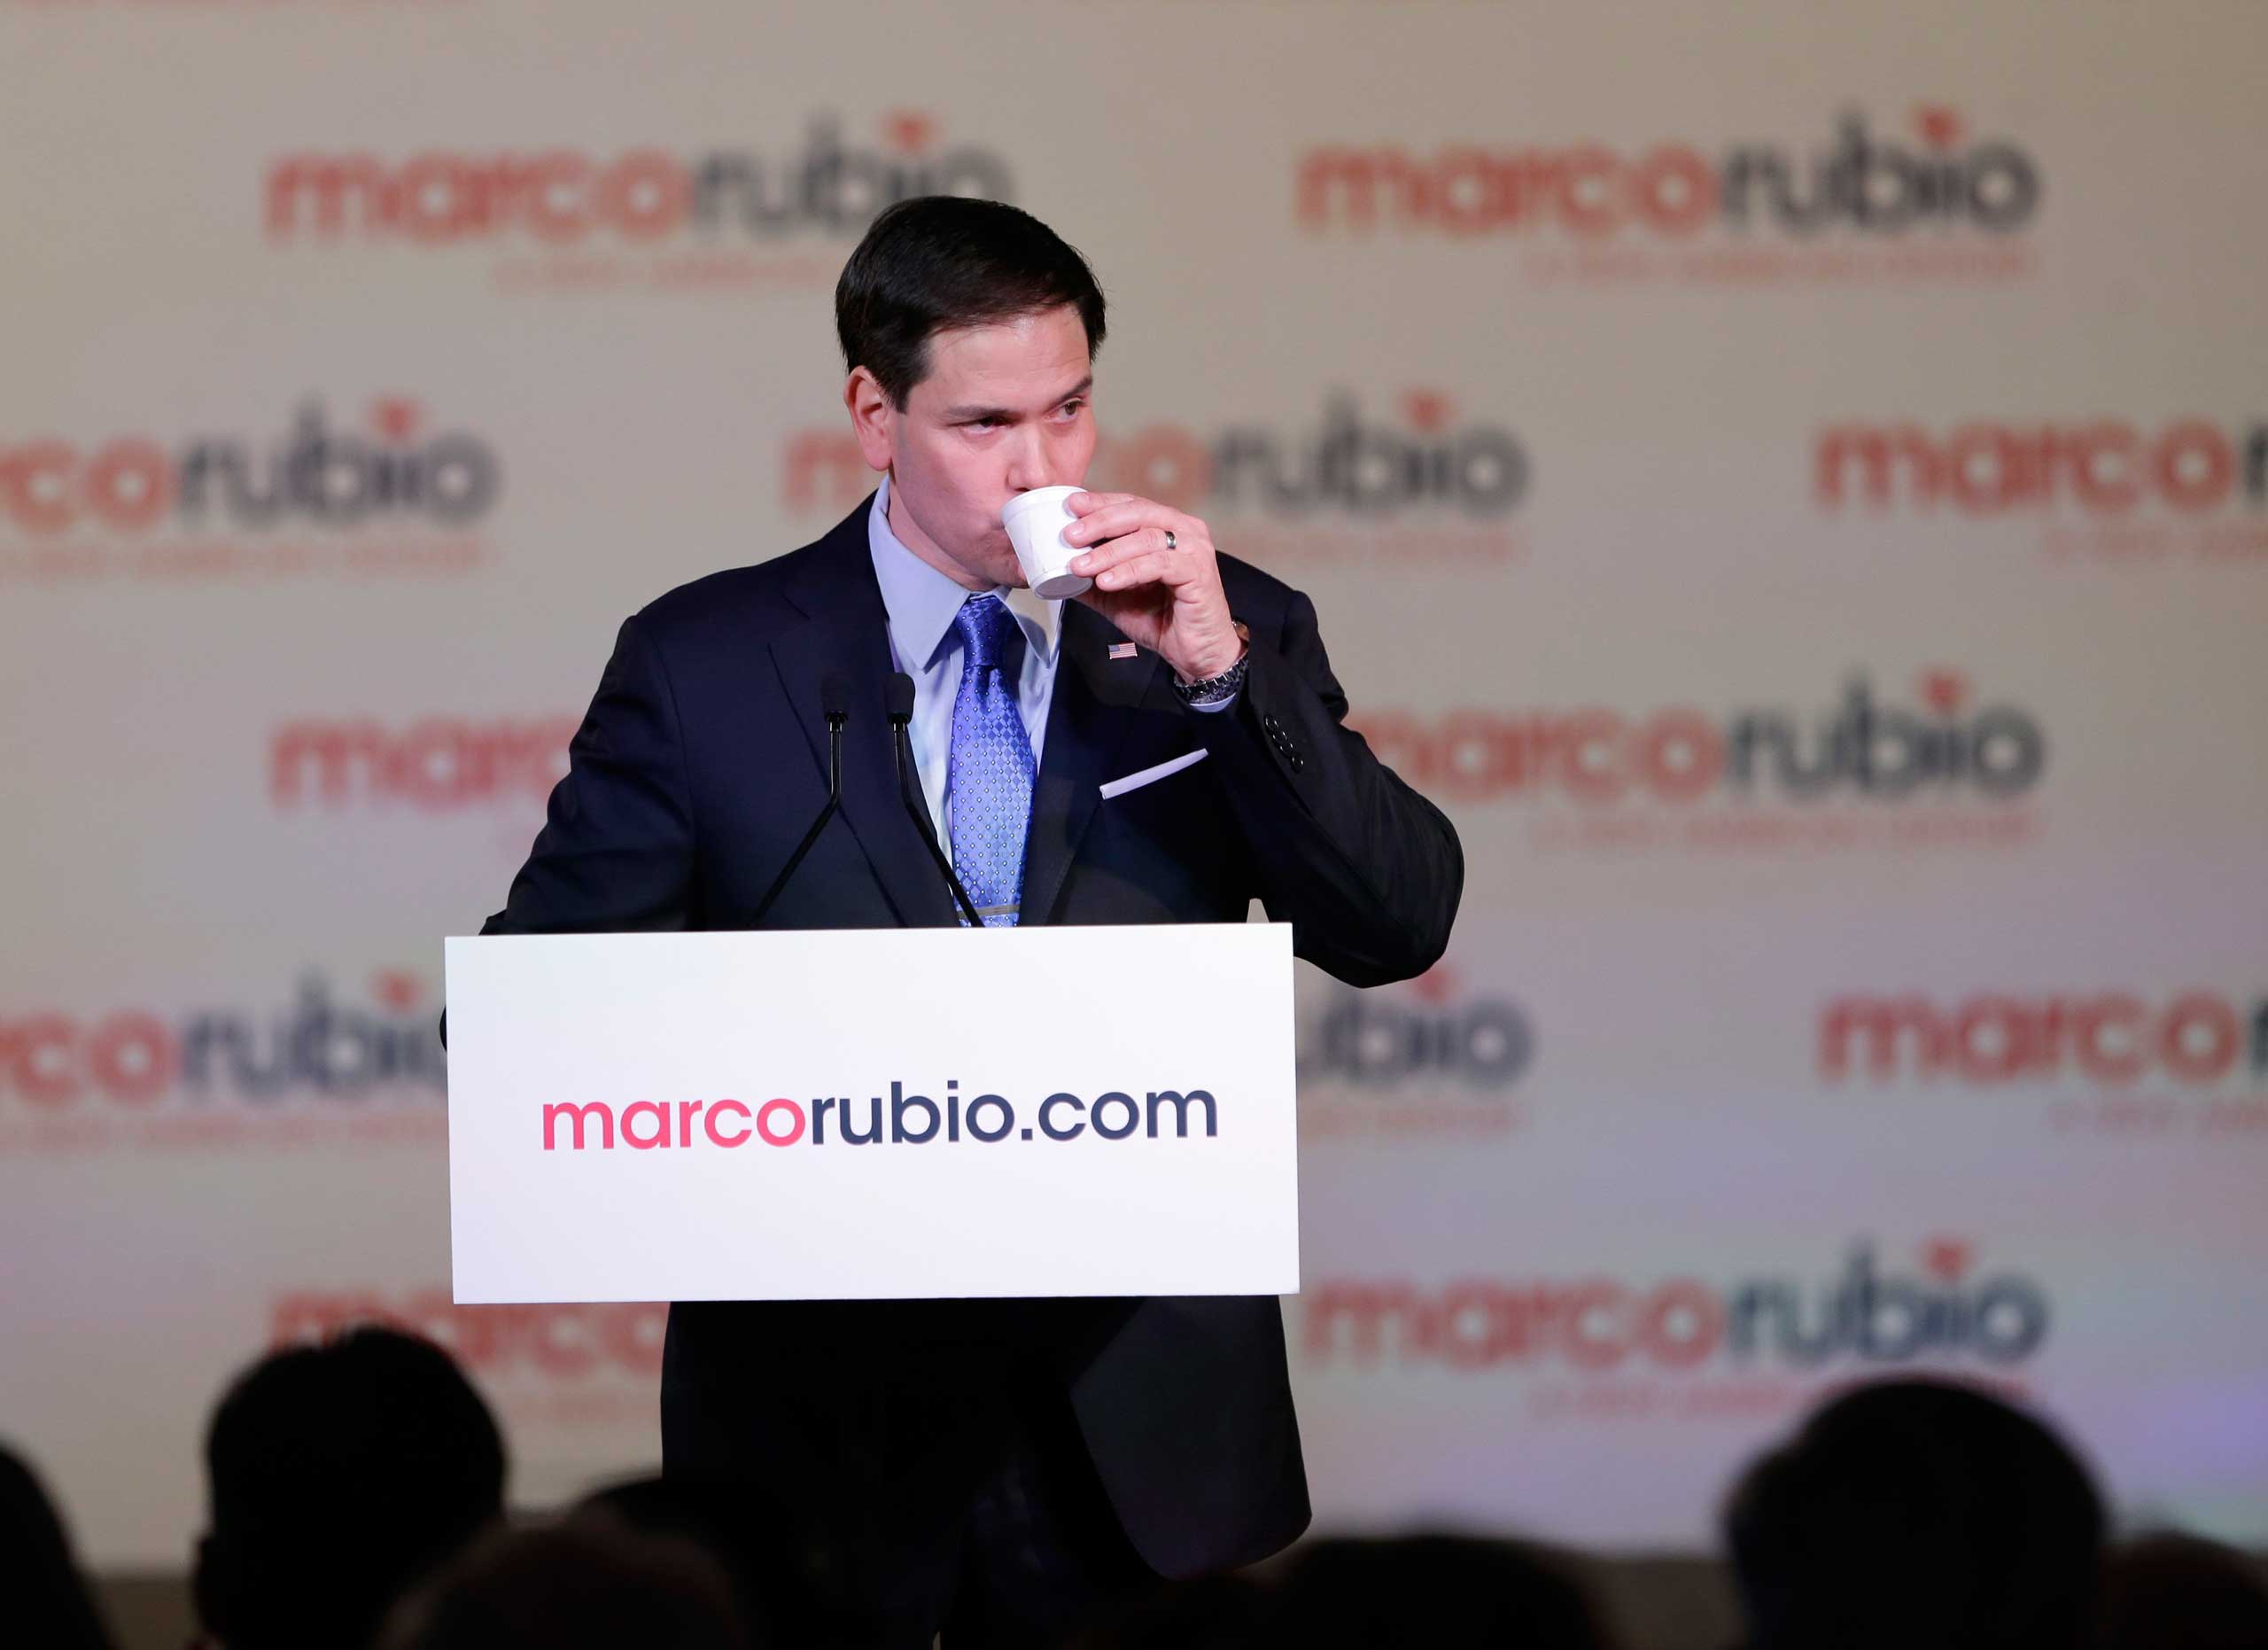 Florida Sen. Marco Rubio announced his campaign for the Republican nomination during a rally at the Freedom Tower in Miami on April 13. He took a drink of water during the speech, a callback to his State of the Union response in 2013.